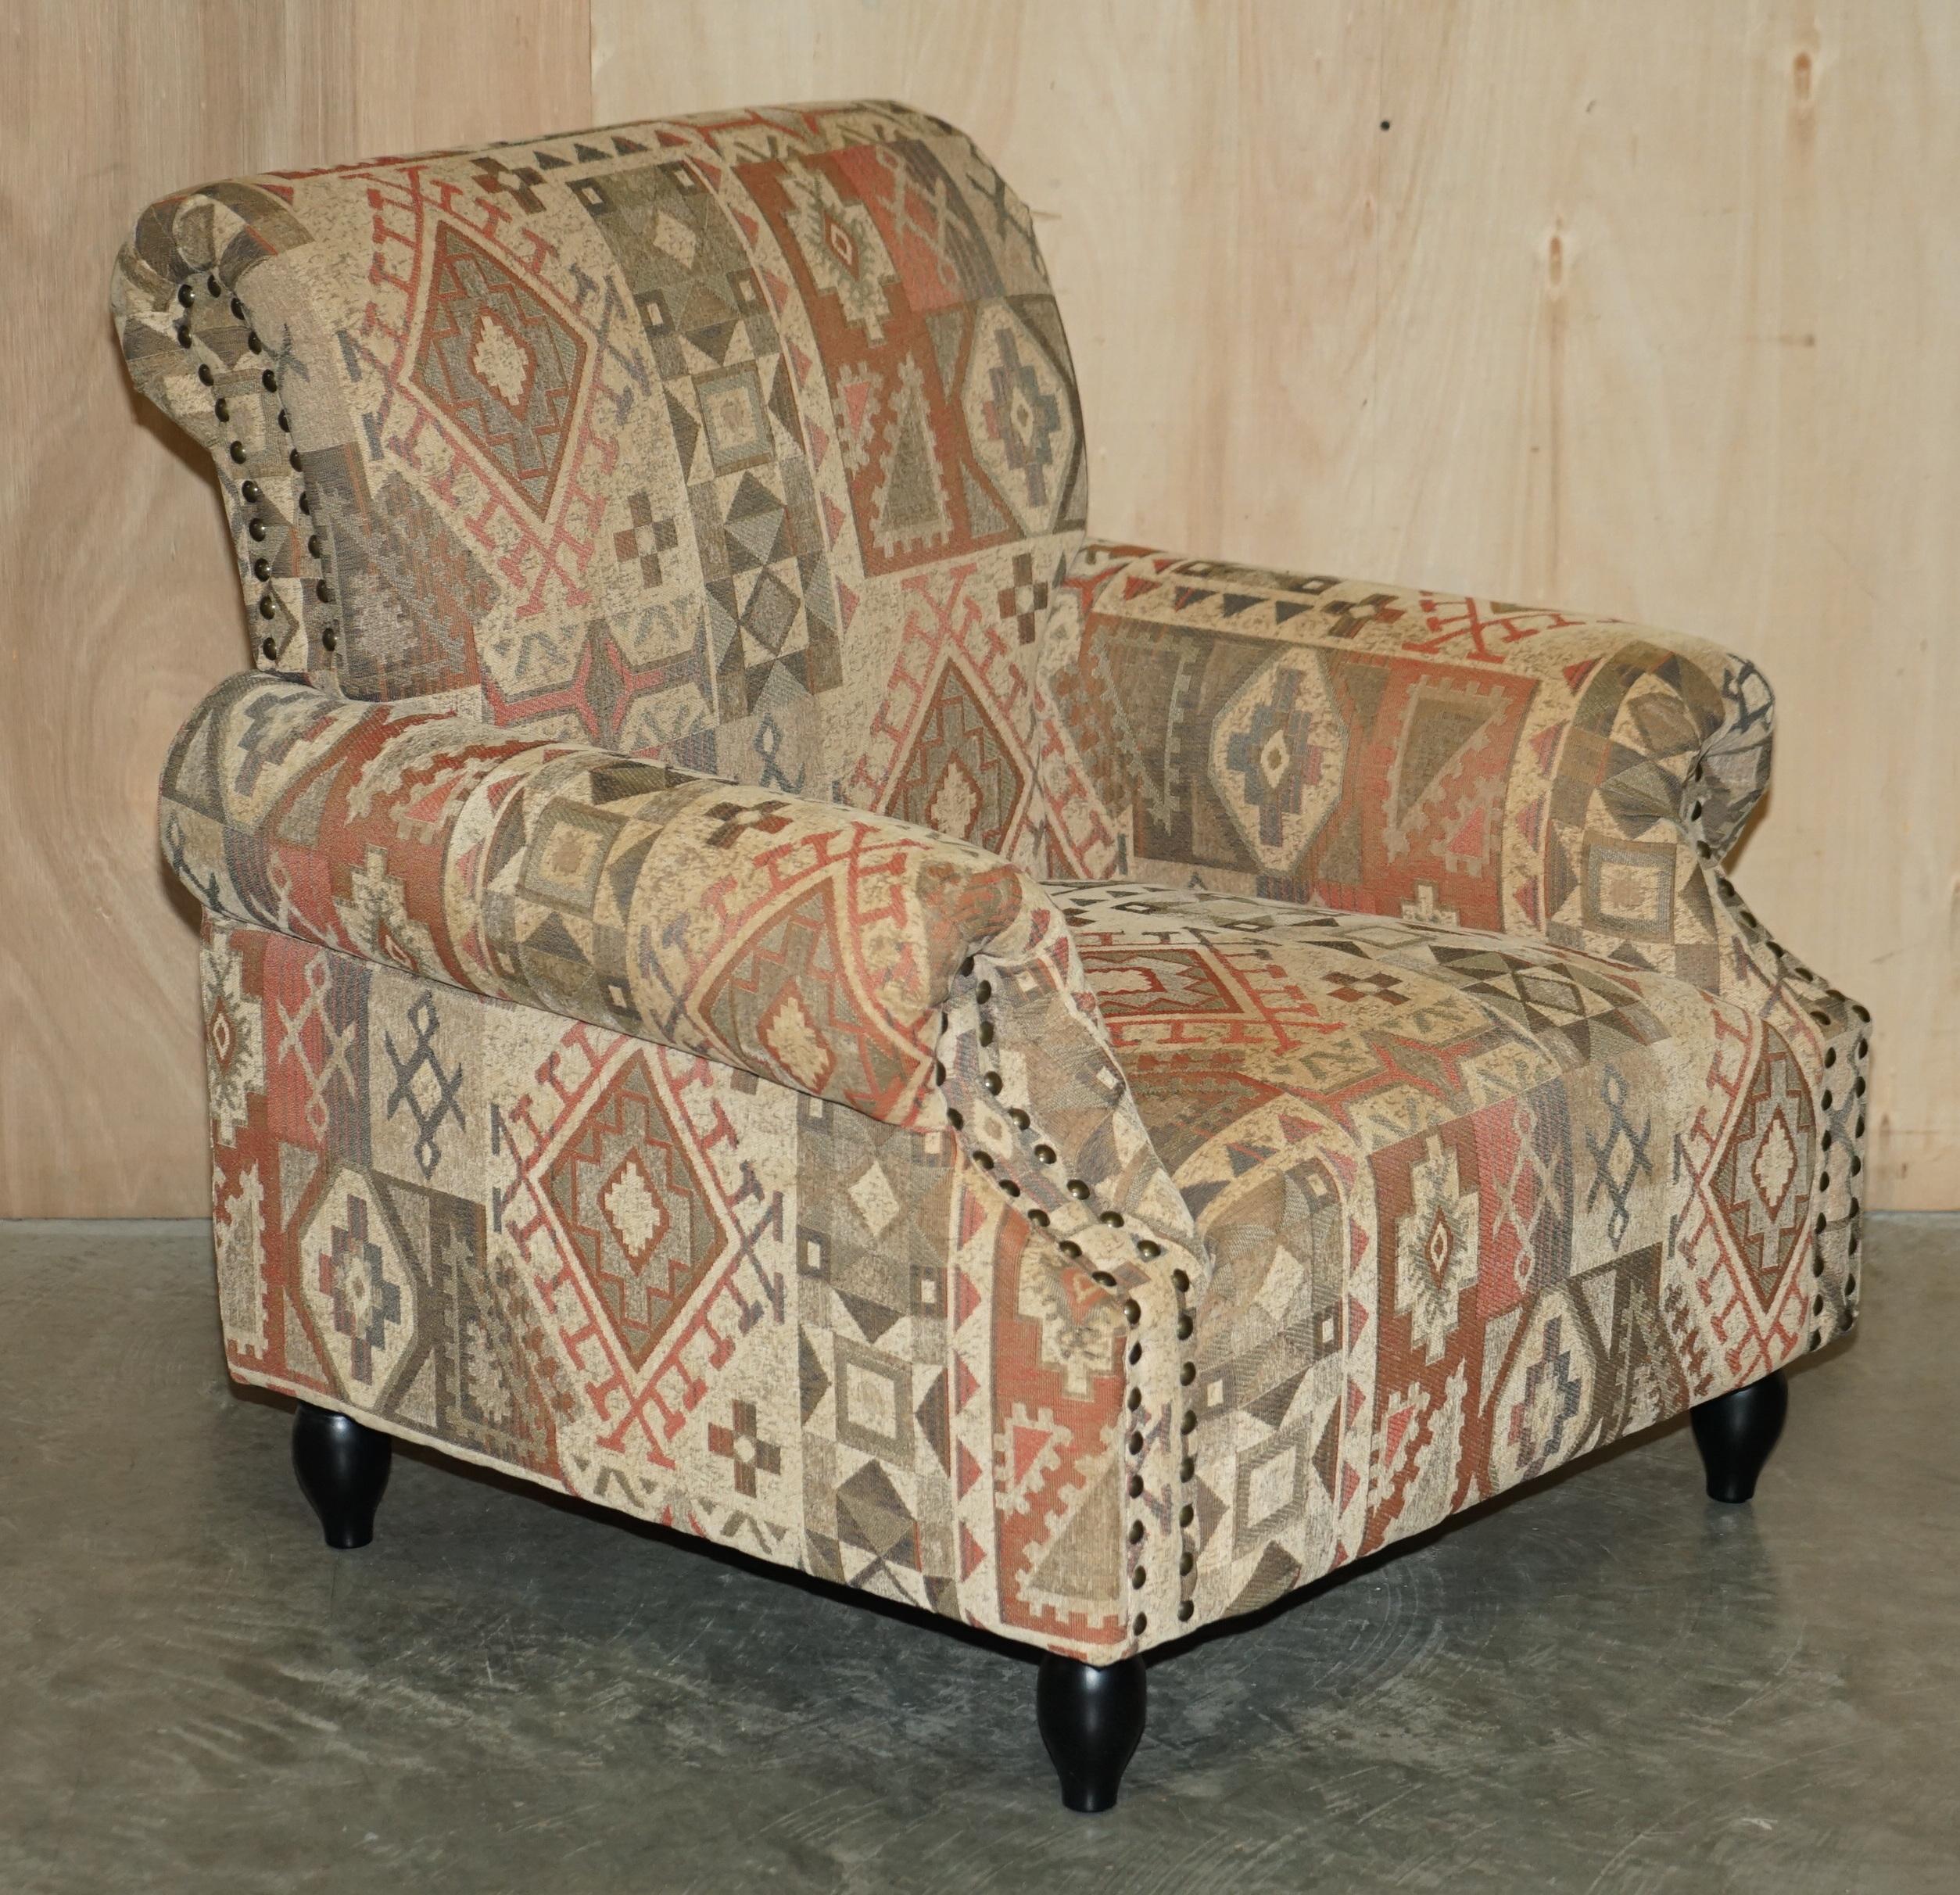 We are delighted to offer for sale this hand made in England, George Smith style, Kilim upholstered armchair with matching footstool / ottoman

A very good looking well made pairing, upholstered in Aztec style kilim's the finish is just about as